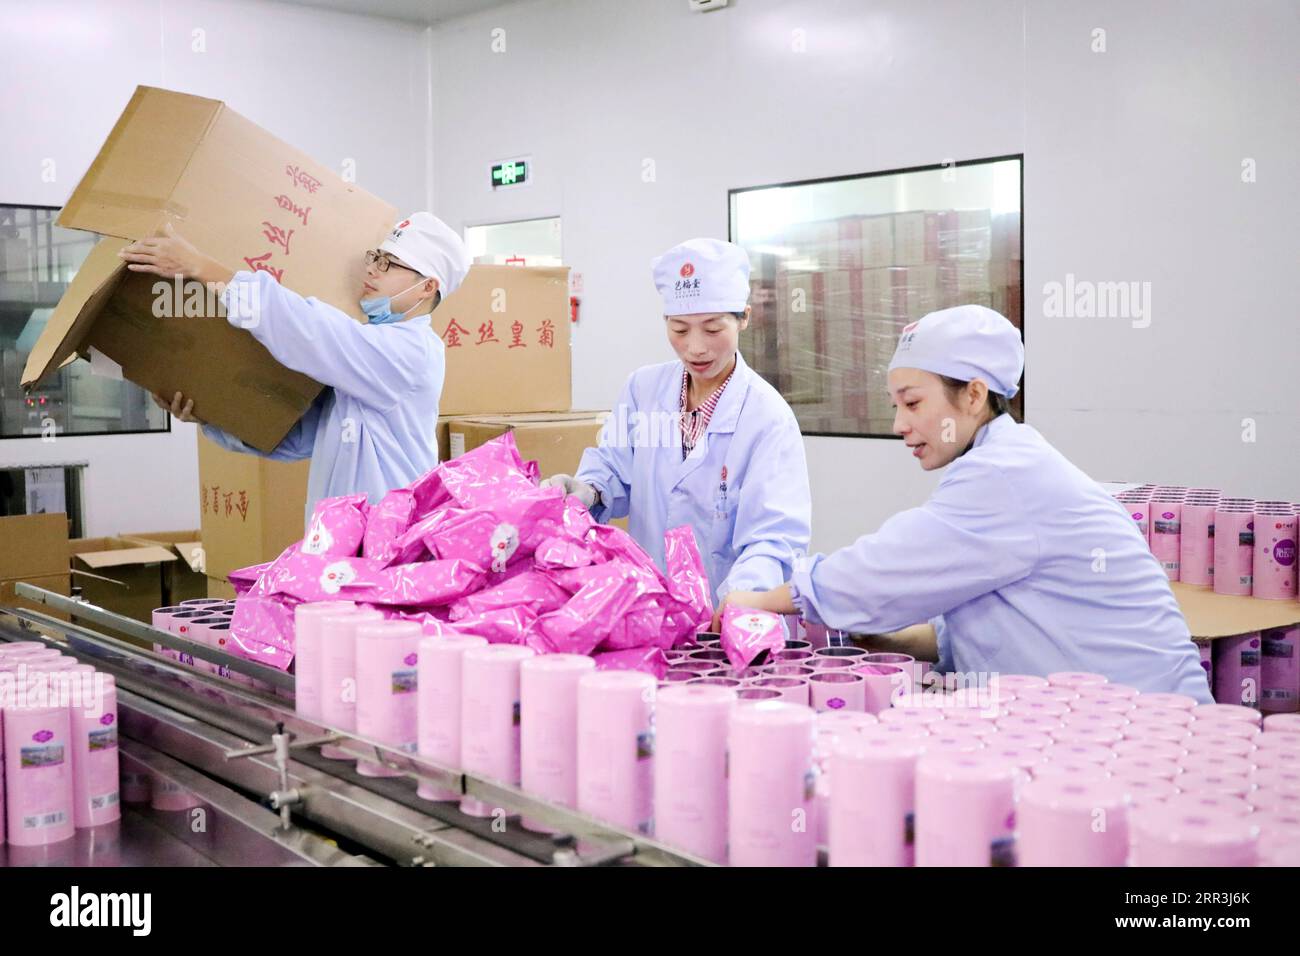 201104 -- HANGZHOU, Nov. 4, 2020 -- Workers pack up products at a company in Tonglu County of Hangzhou, east China s Zhejiang Province, Nov. 4, 2020. Companies started to prepare for the upcoming Singles Day sale, an online shopping festival. Photo by /Xinhua CHINA-SINGLES DAY SALE-PREPARATION CN XuxJunyong PUBLICATIONxNOTxINxCHN Stock Photo